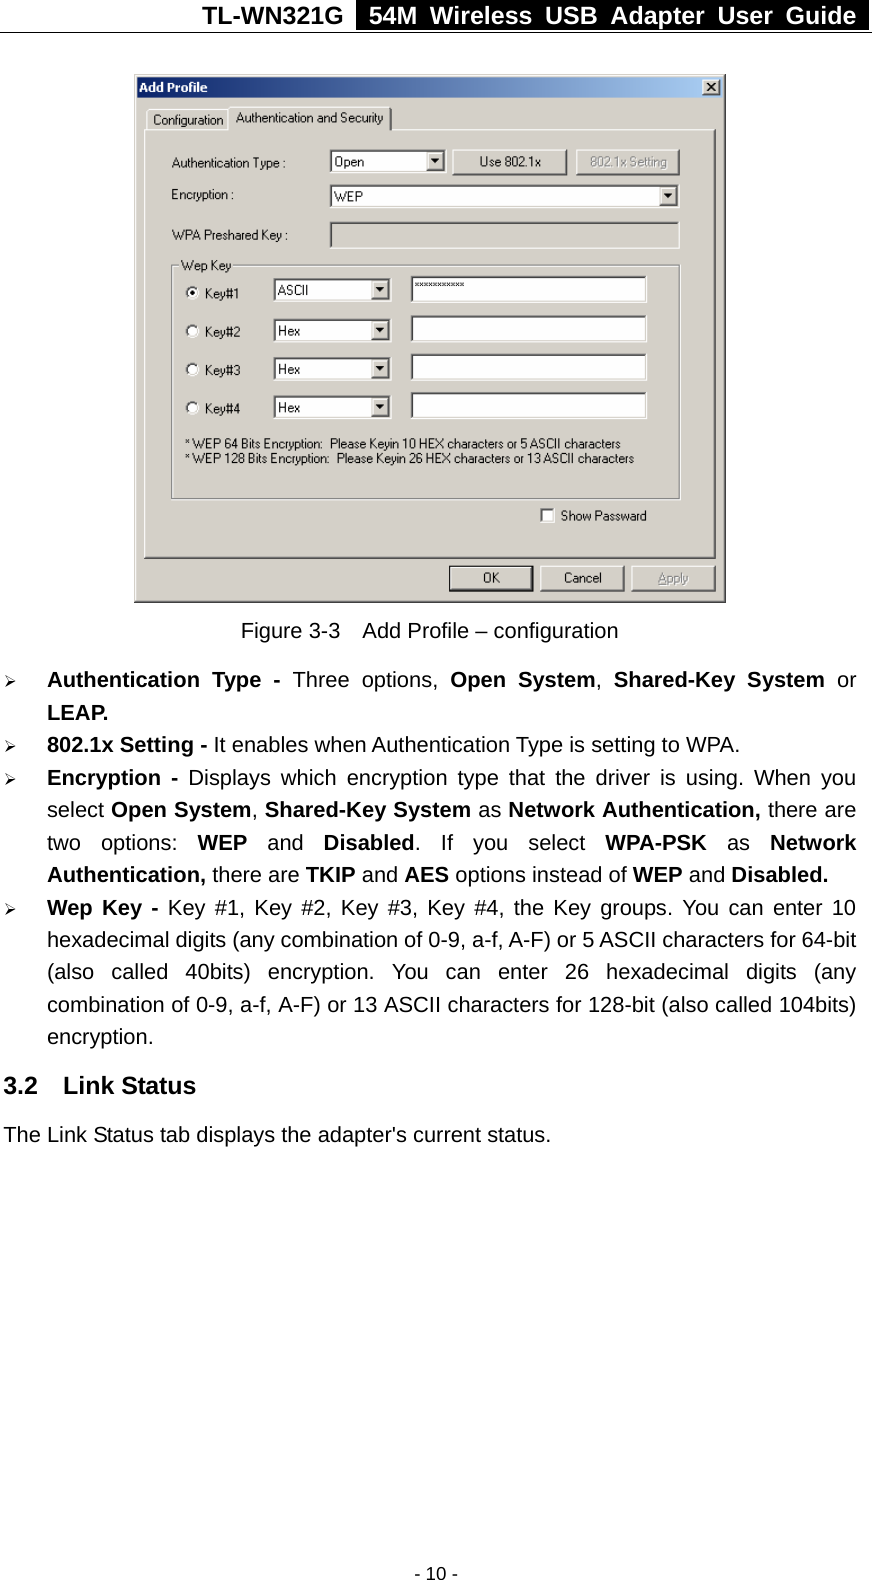 TL-WN321G   54M Wireless USB Adapter User Guide   Figure 3-3    Add Profile – configuration ¾ Authentication Type - Three options, Open System,  Shared-Key System or LEAP. ¾ 802.1x Setting - It enables when Authentication Type is setting to WPA. ¾ Encryption - Displays which encryption type that the driver is using. When you select Open System, Shared-Key System as Network Authentication, there are two options: WEP and Disabled. If you select WPA-PSK  as  Network Authentication, there are TKIP and AES options instead of WEP and Disabled.  ¾ Wep Key - Key #1, Key #2, Key #3, Key #4, the Key groups. You can enter 10 hexadecimal digits (any combination of 0-9, a-f, A-F) or 5 ASCII characters for 64-bit (also called 40bits) encryption. You can enter 26 hexadecimal digits (any combination of 0-9, a-f, A-F) or 13 ASCII characters for 128-bit (also called 104bits) encryption. 3.2  Link Status The Link Status tab displays the adapter&apos;s current status.   - 10 -